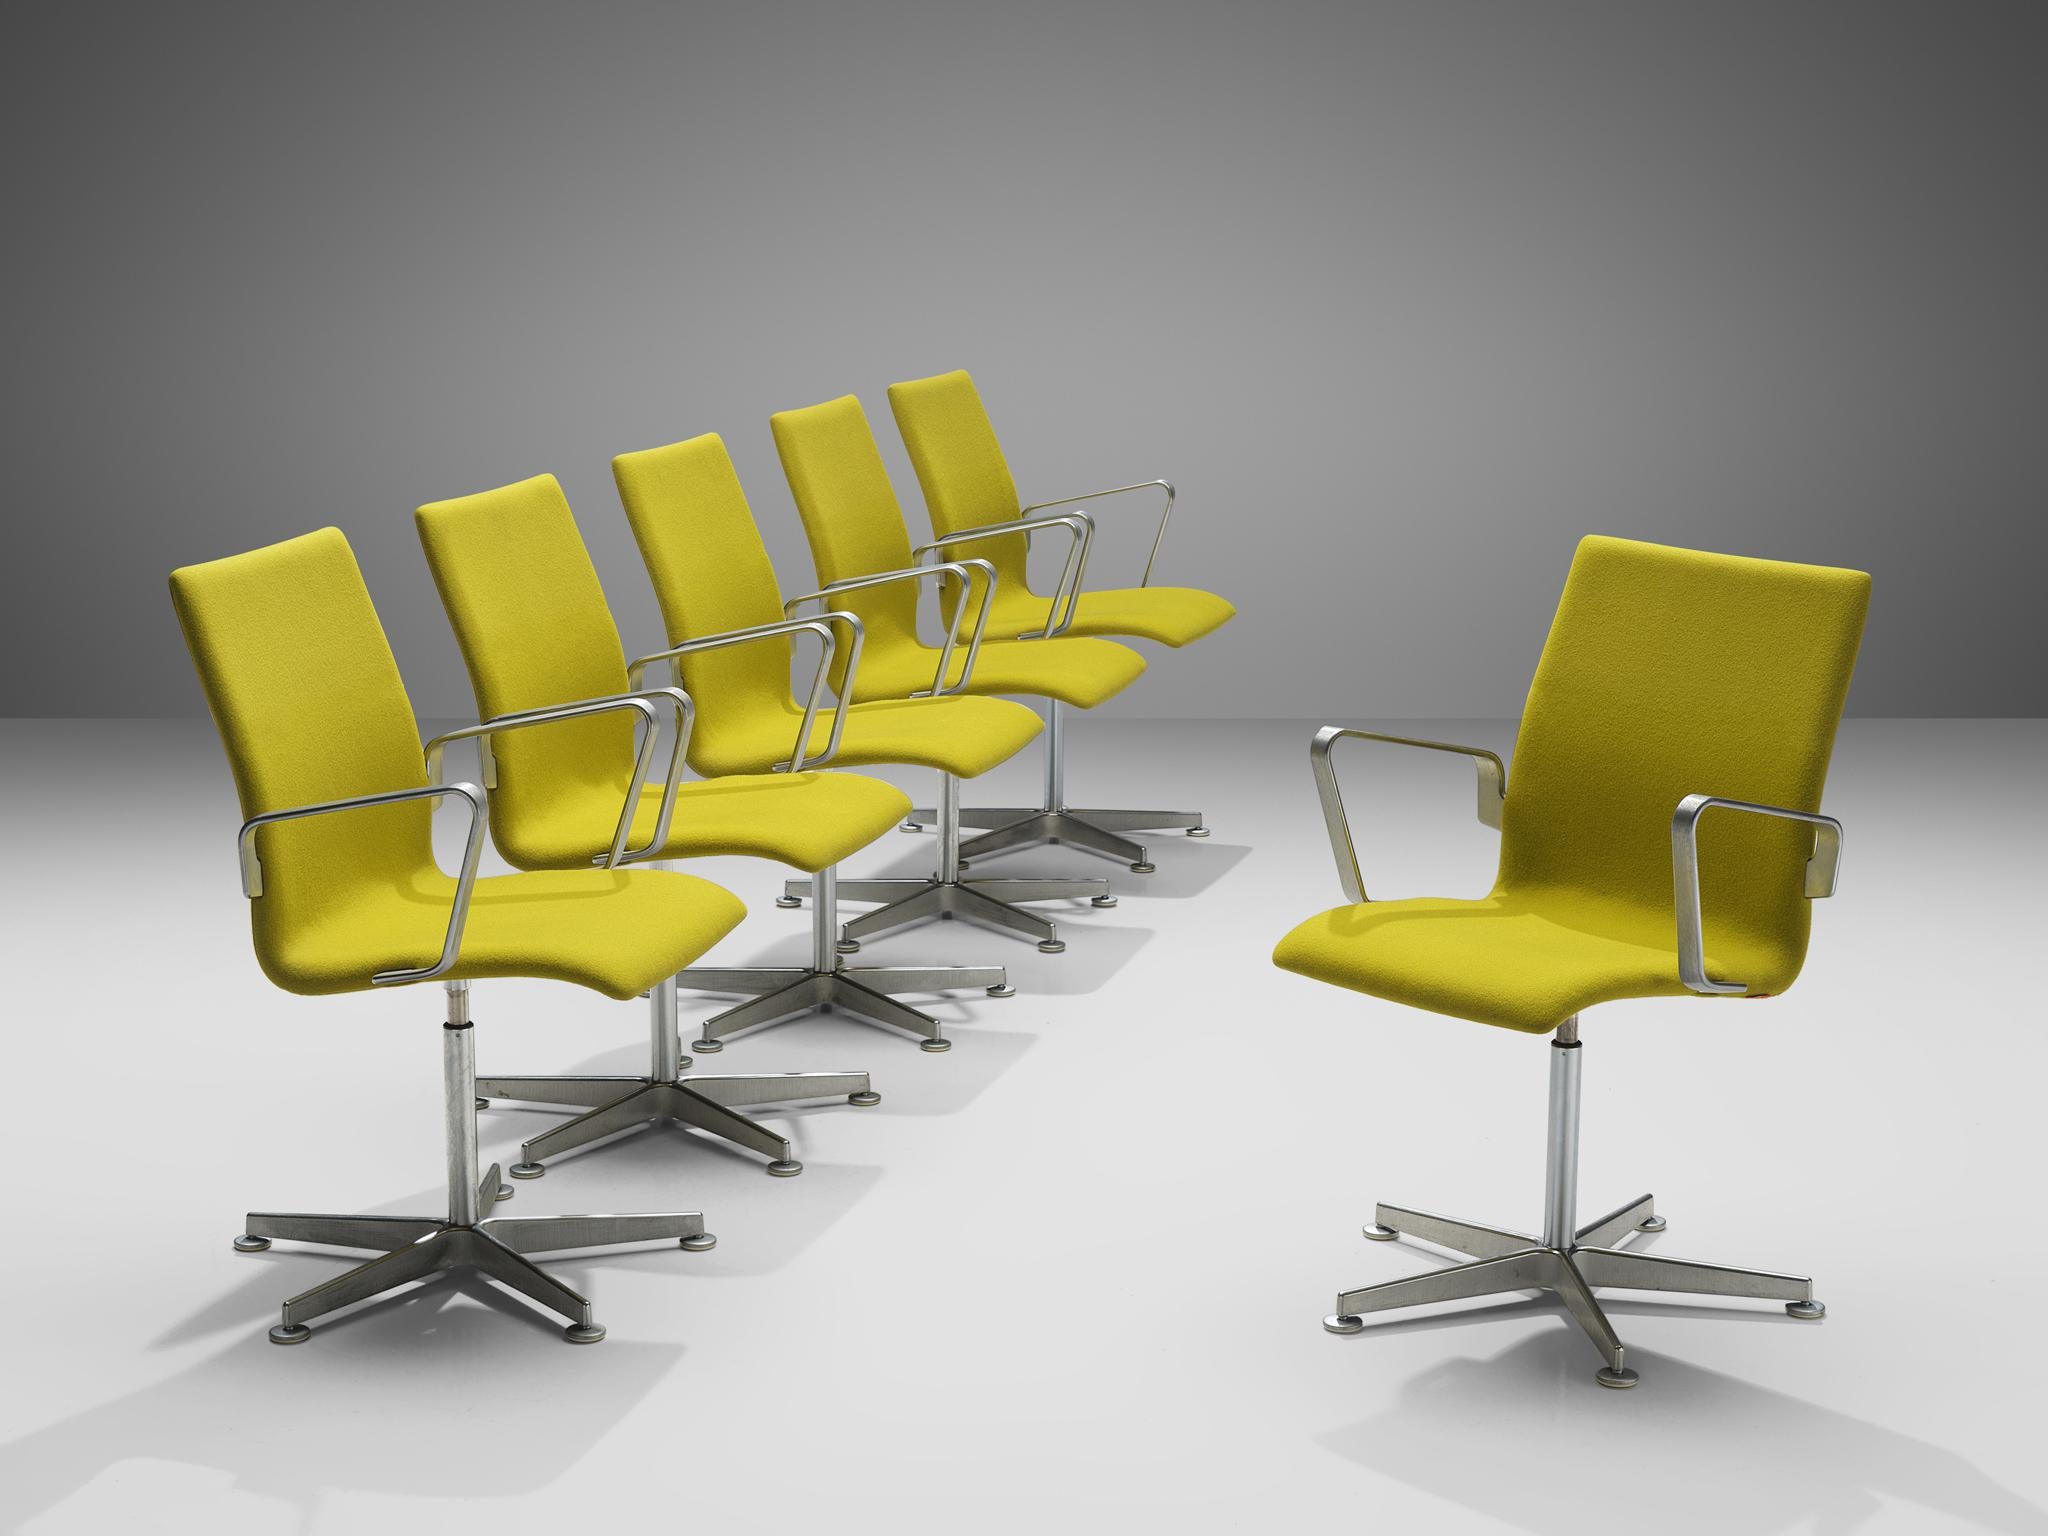 Arne Jacobsen for Fritz Hansen, set of 'Oxford' chairs, metal, yellow fabric, Denmark, design 1965, production later

These classic executive office chairs feature a medium high back (as opposed to the models with a low and a very high back), swivel